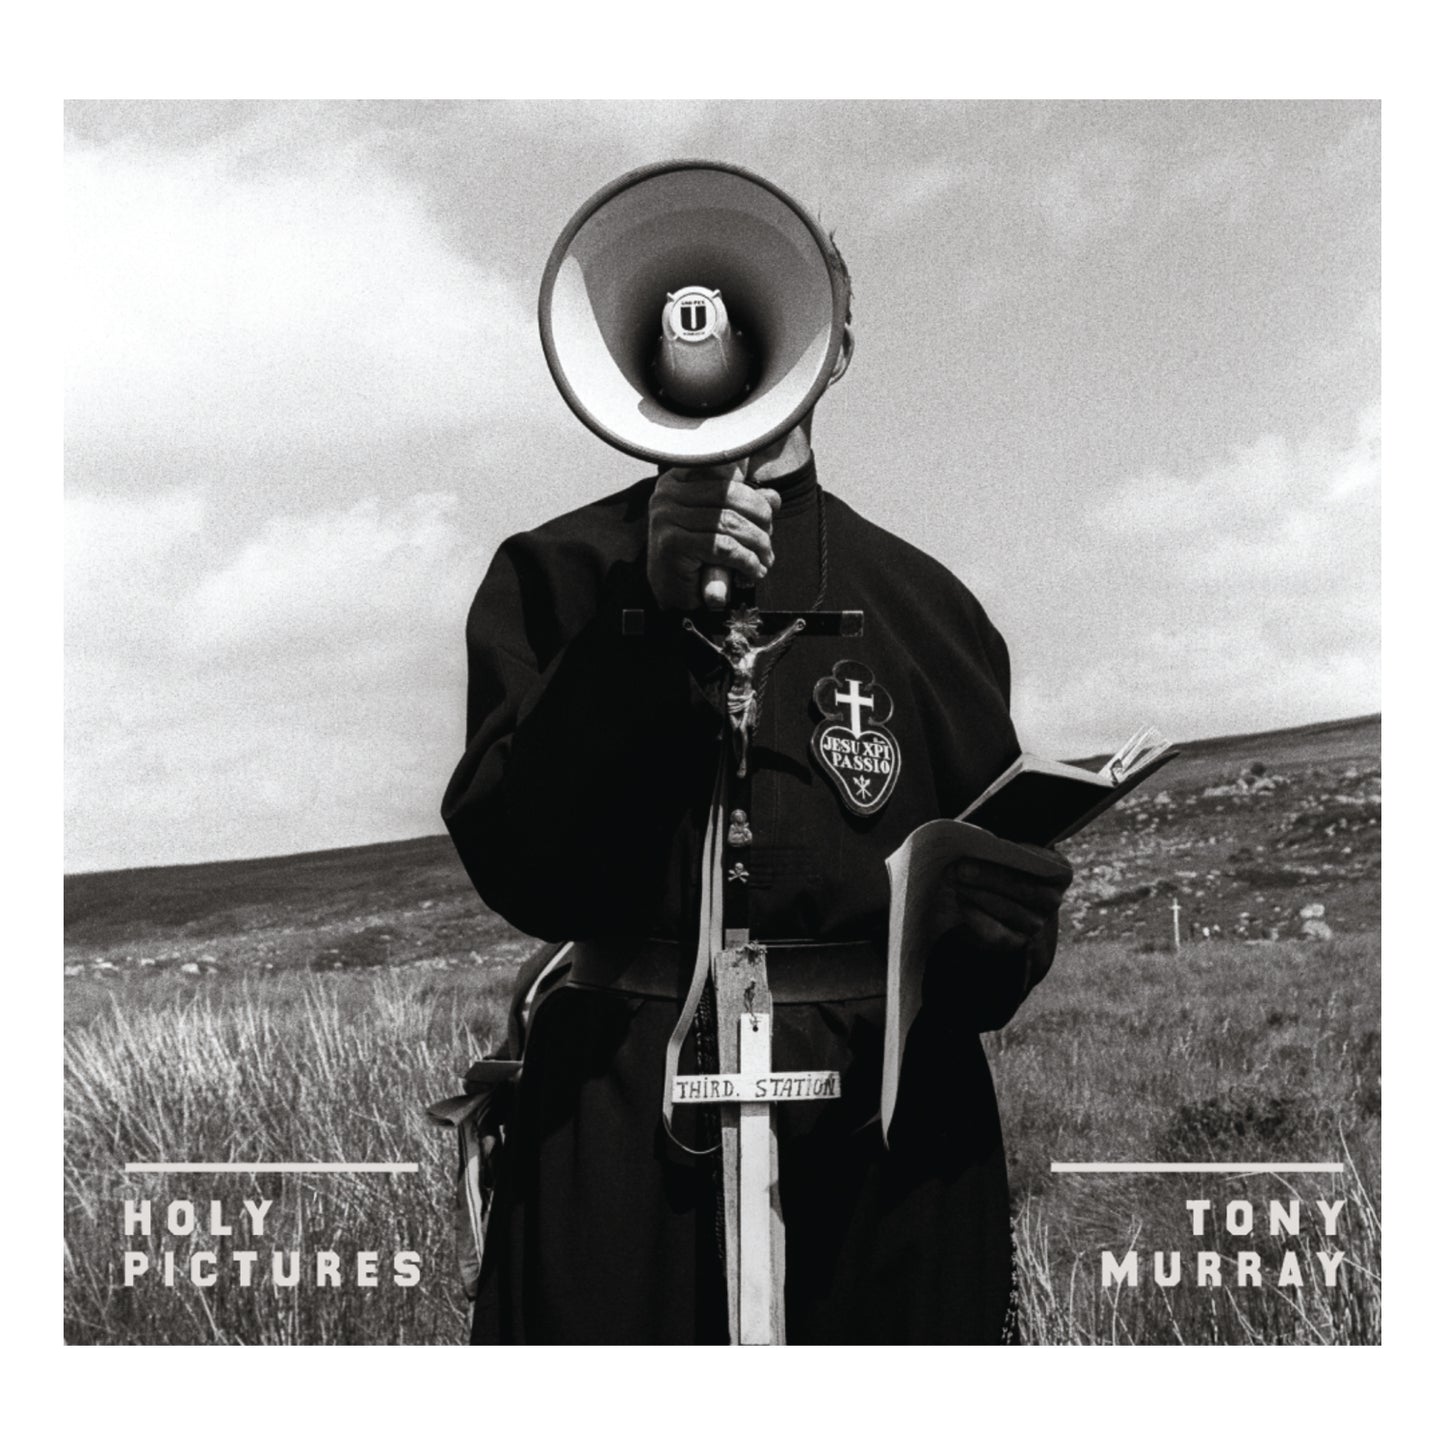 Holy Pictures (Special Edition) by Tony Murray